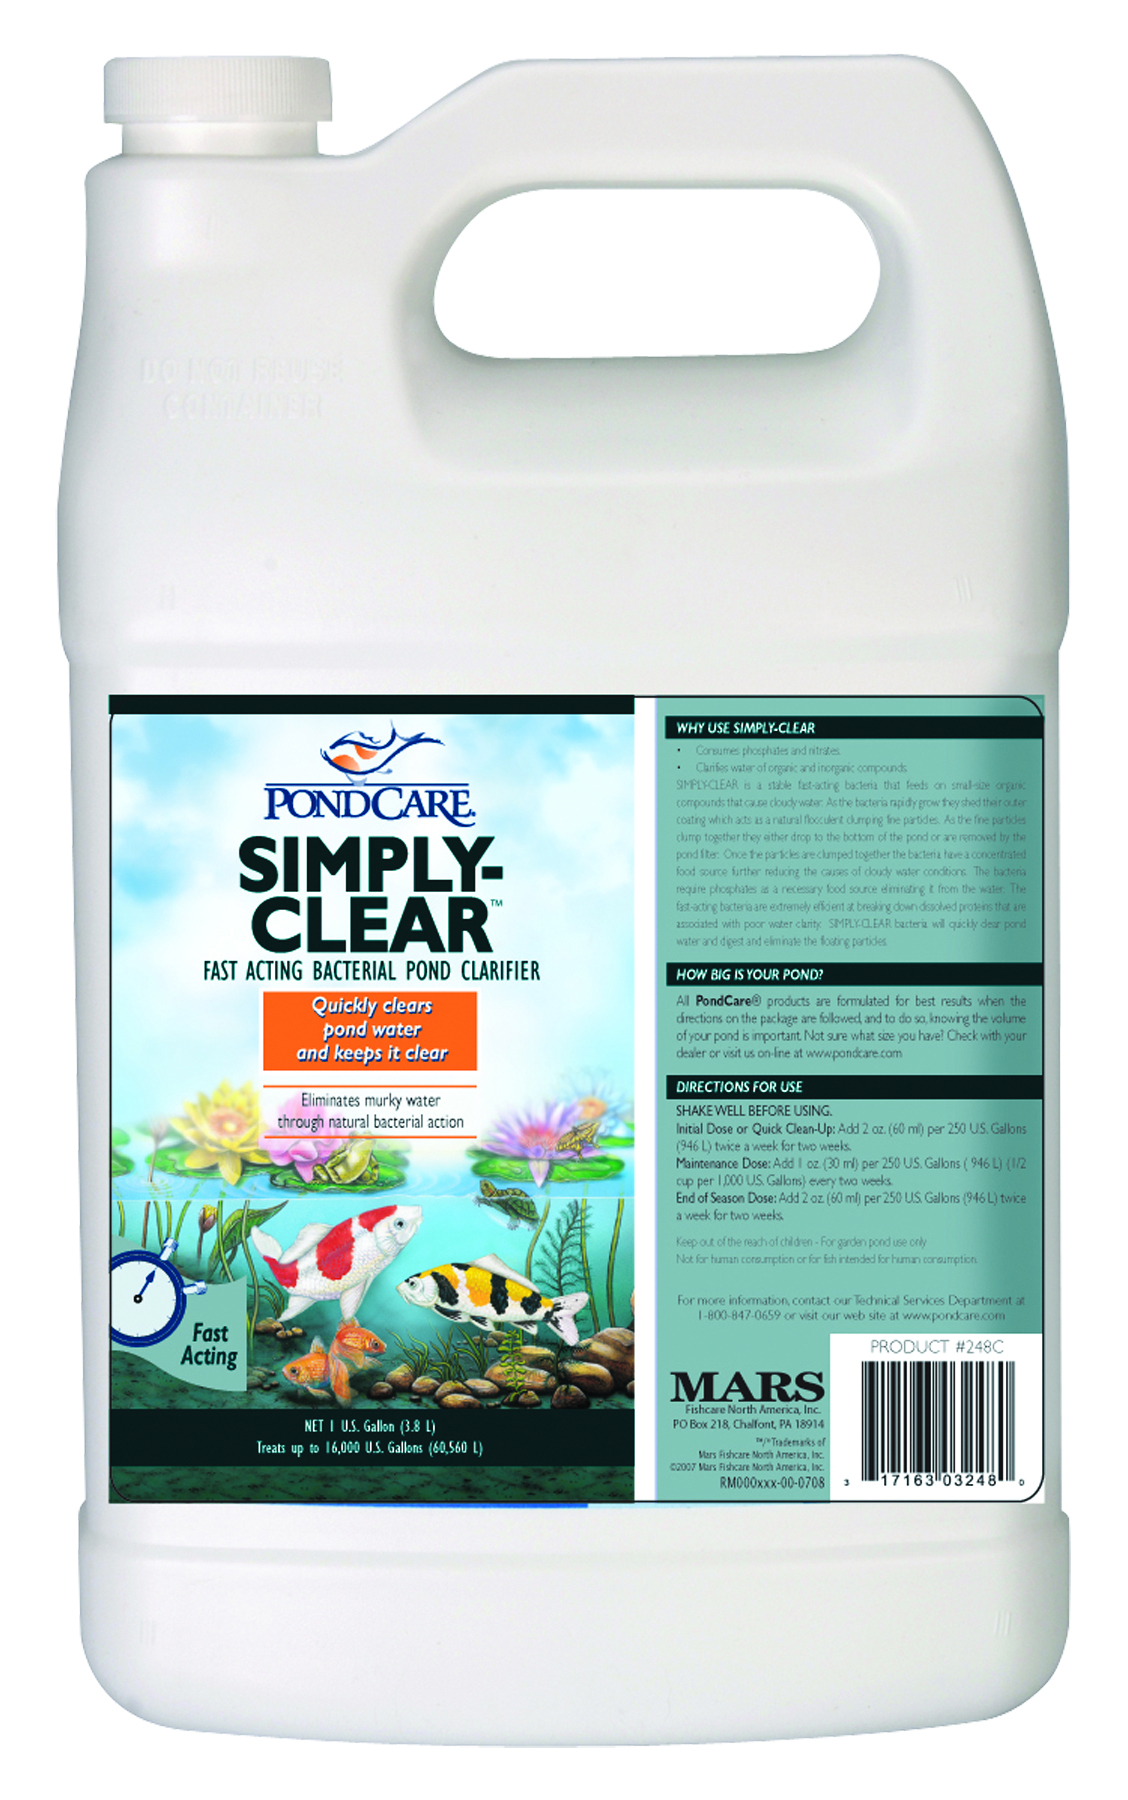 POND CARE SIMPLY CLEAR